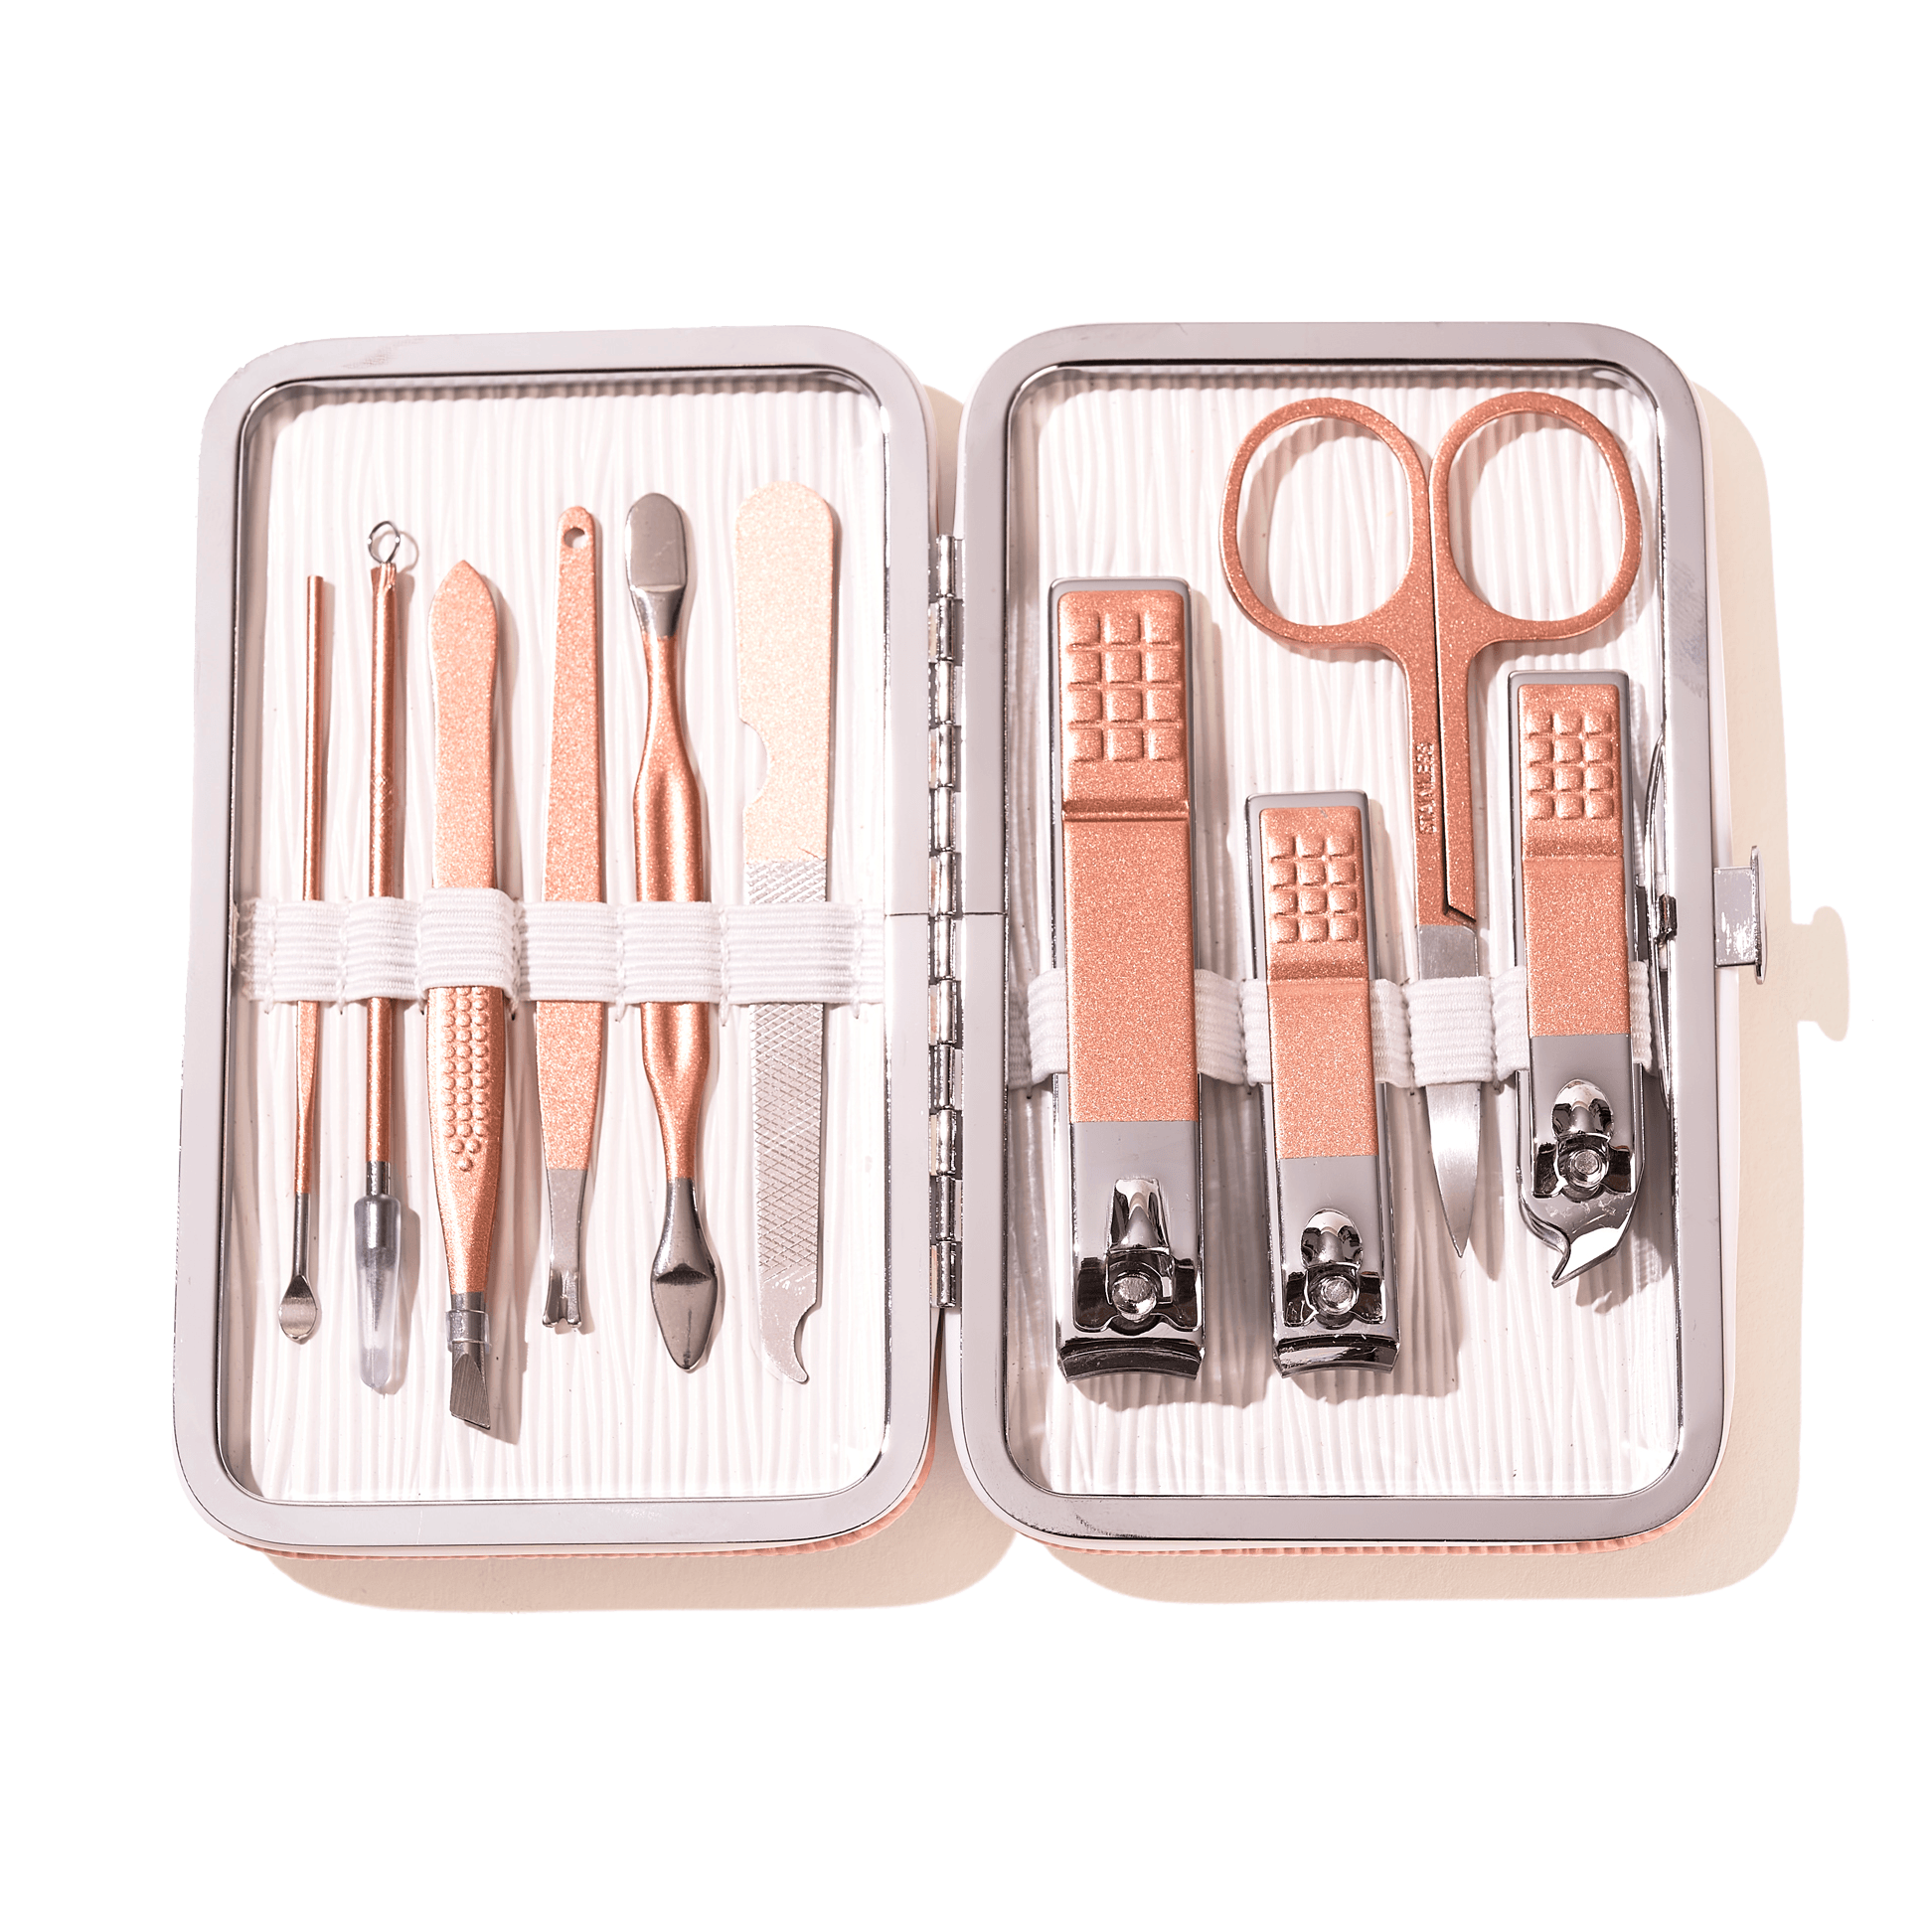 Blossom 10 in 1 Professional Manicure, Pedicure + Facial Tools Grooming  Kit, Stainless Steel Nailcare Nail Clipper Kit with Nail Care Tools, Travel